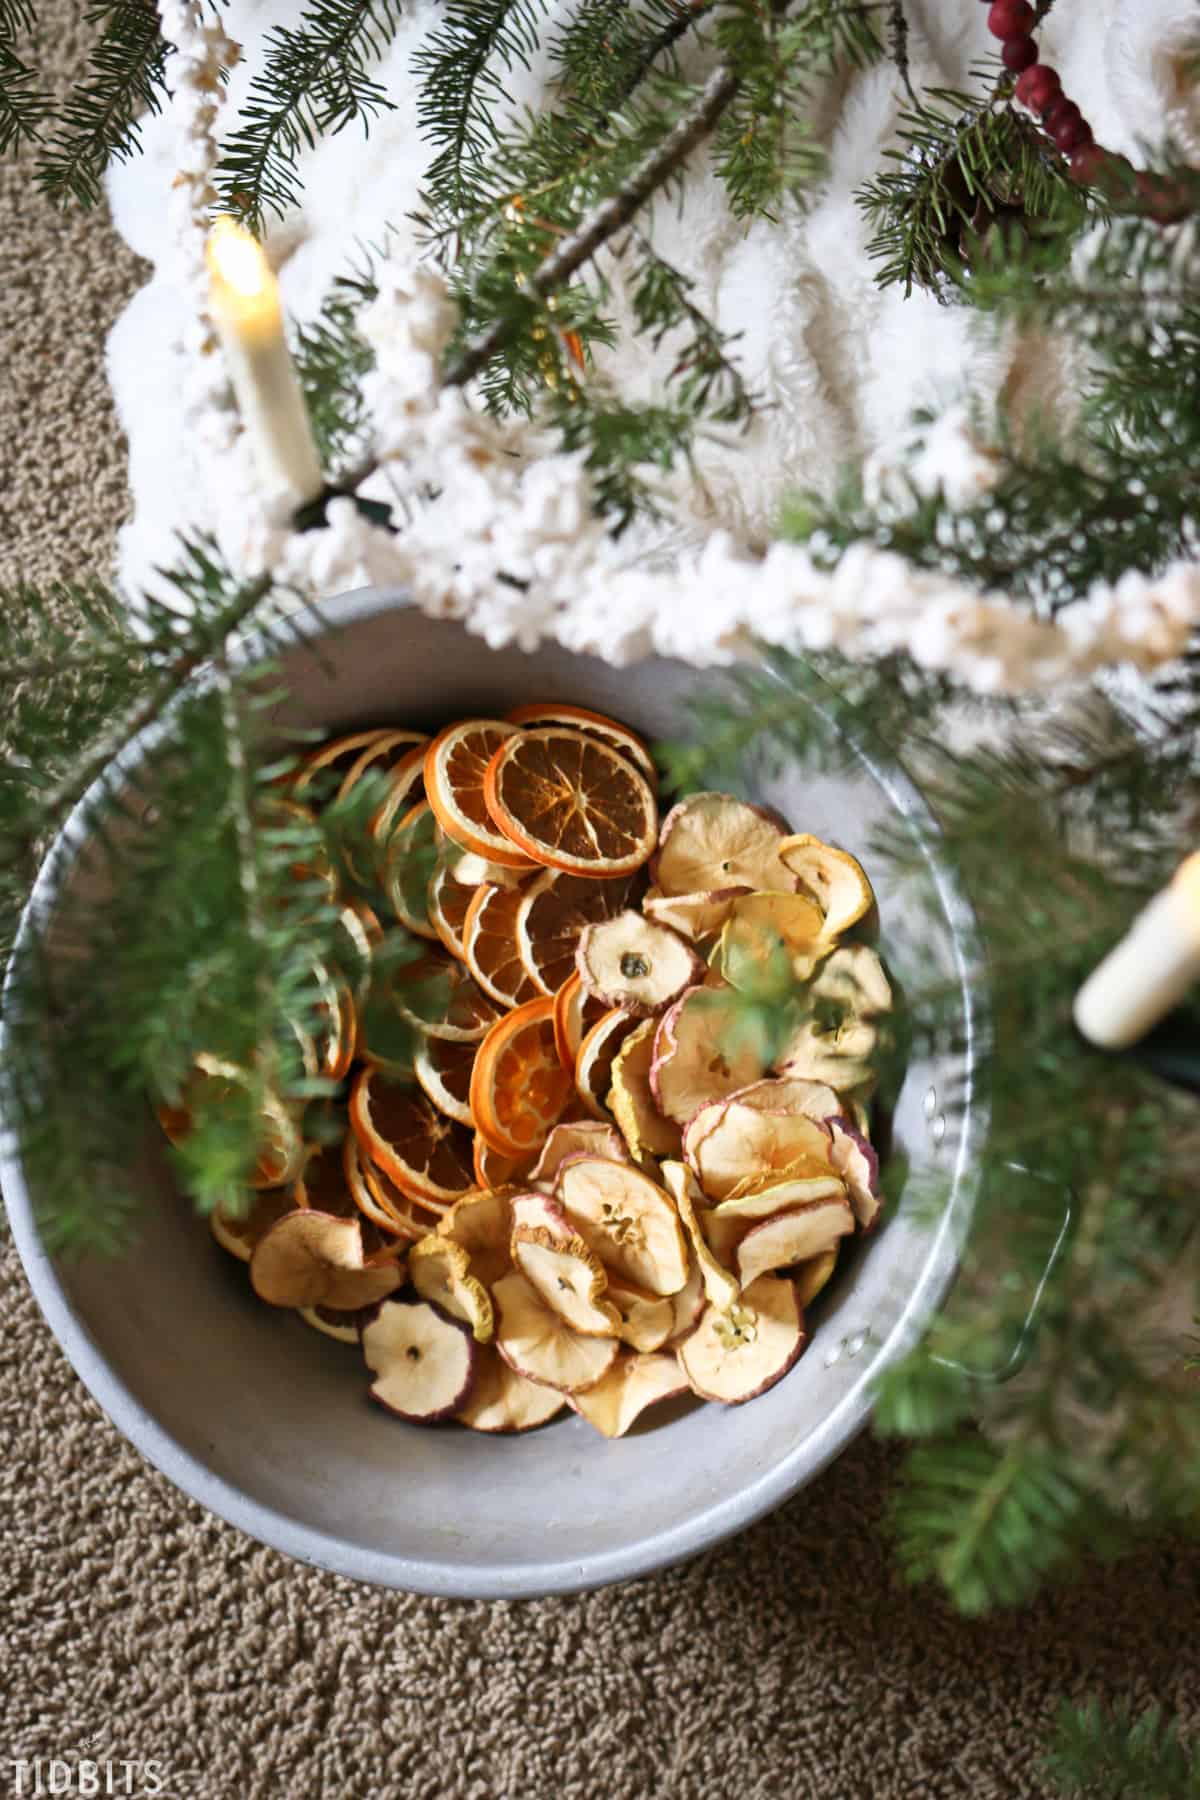 A bowl of natural orange and apple decorations being hung on a Christmas tree.